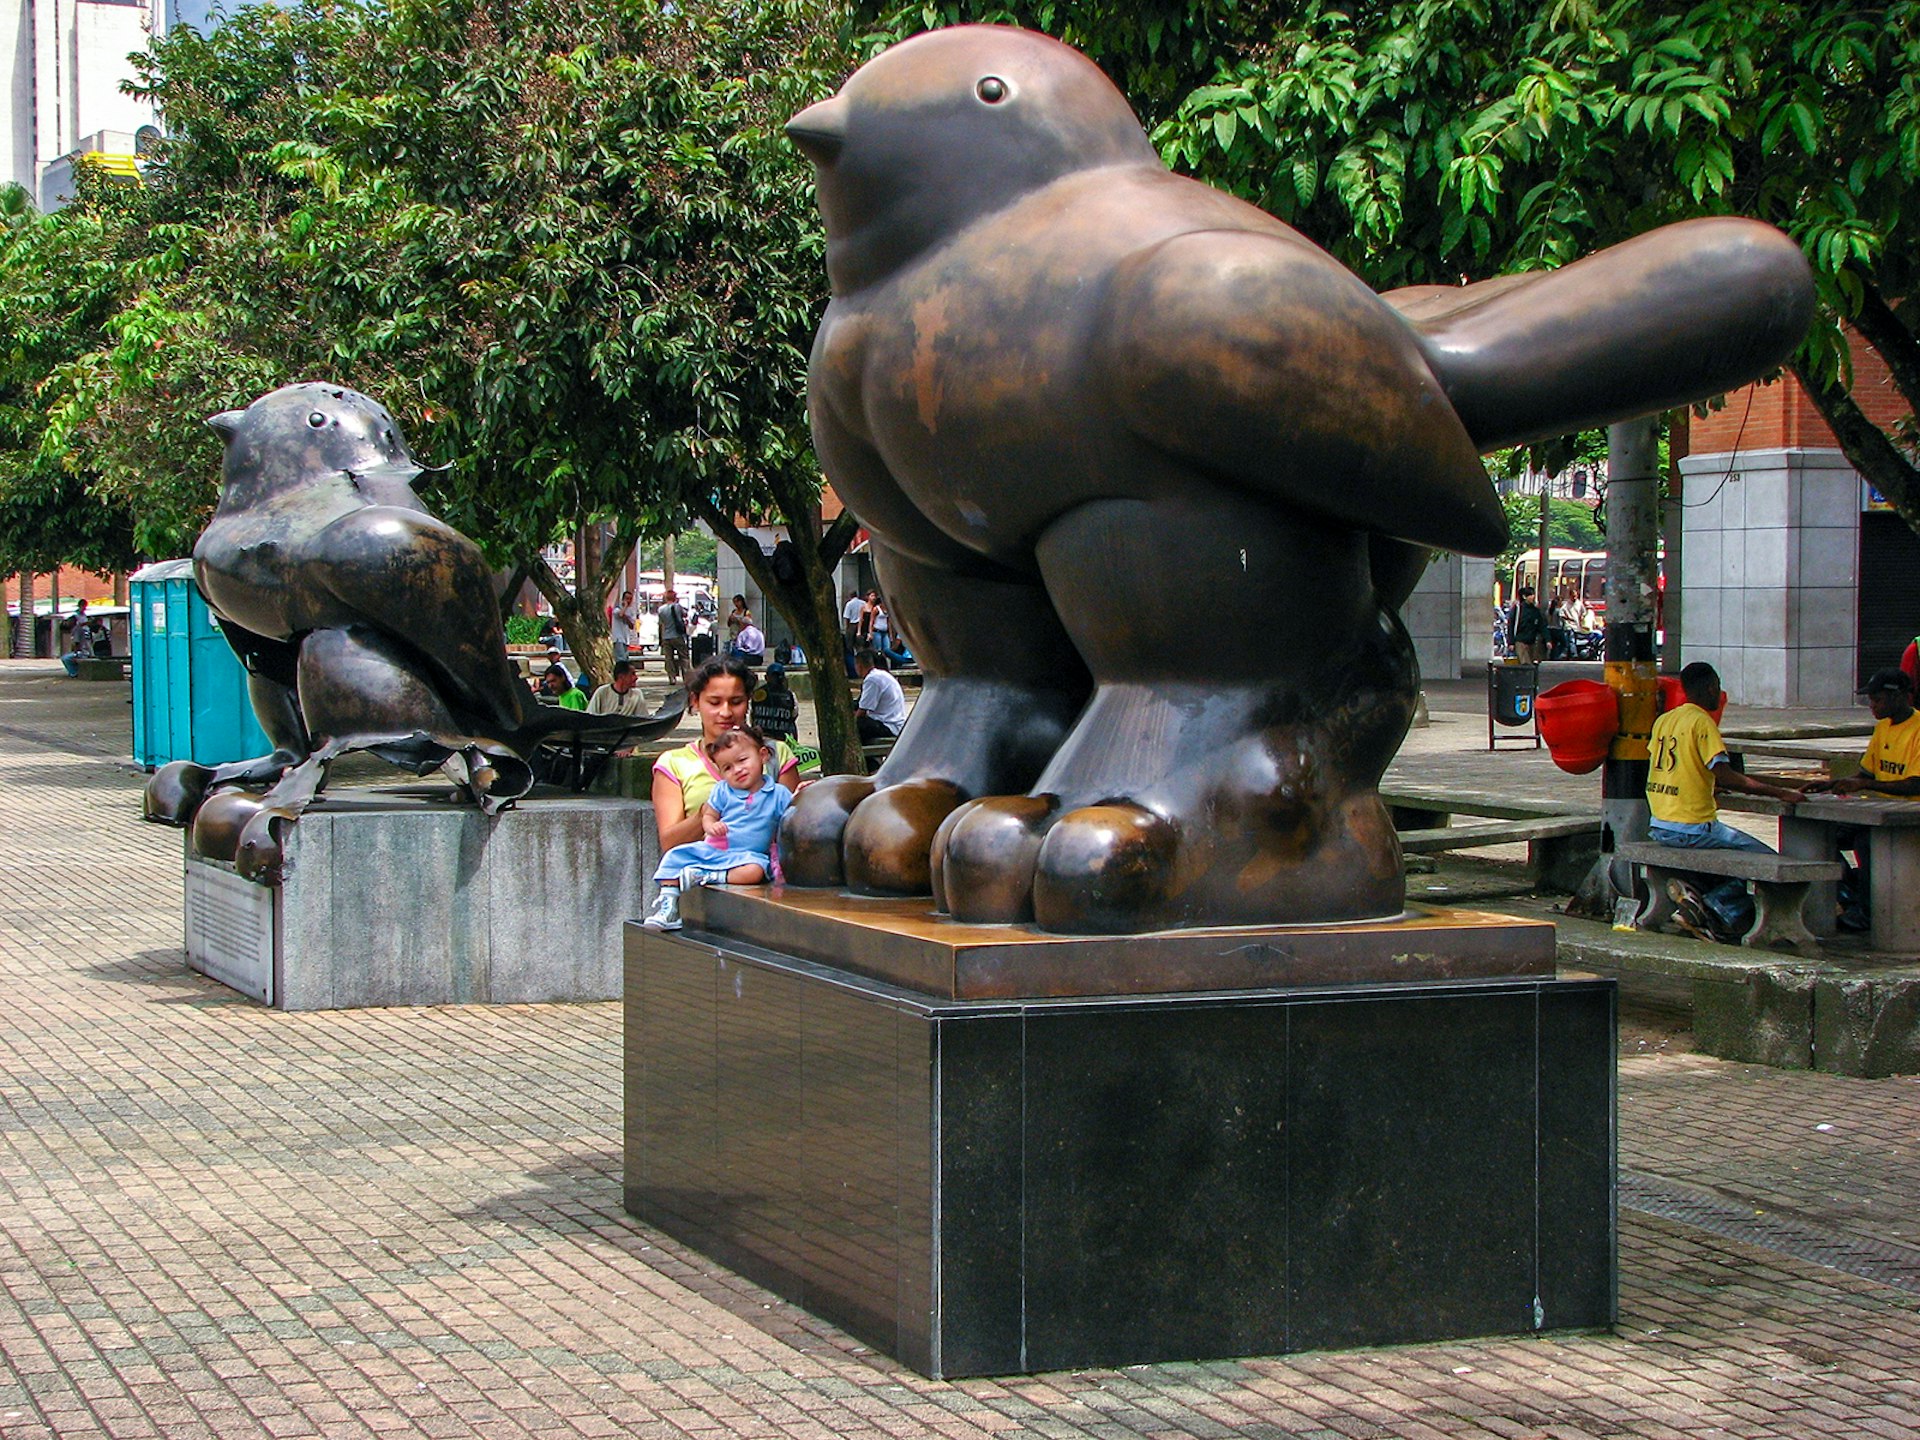 Two bronze Botero statues in a park, with a woman and a baby sitting on one